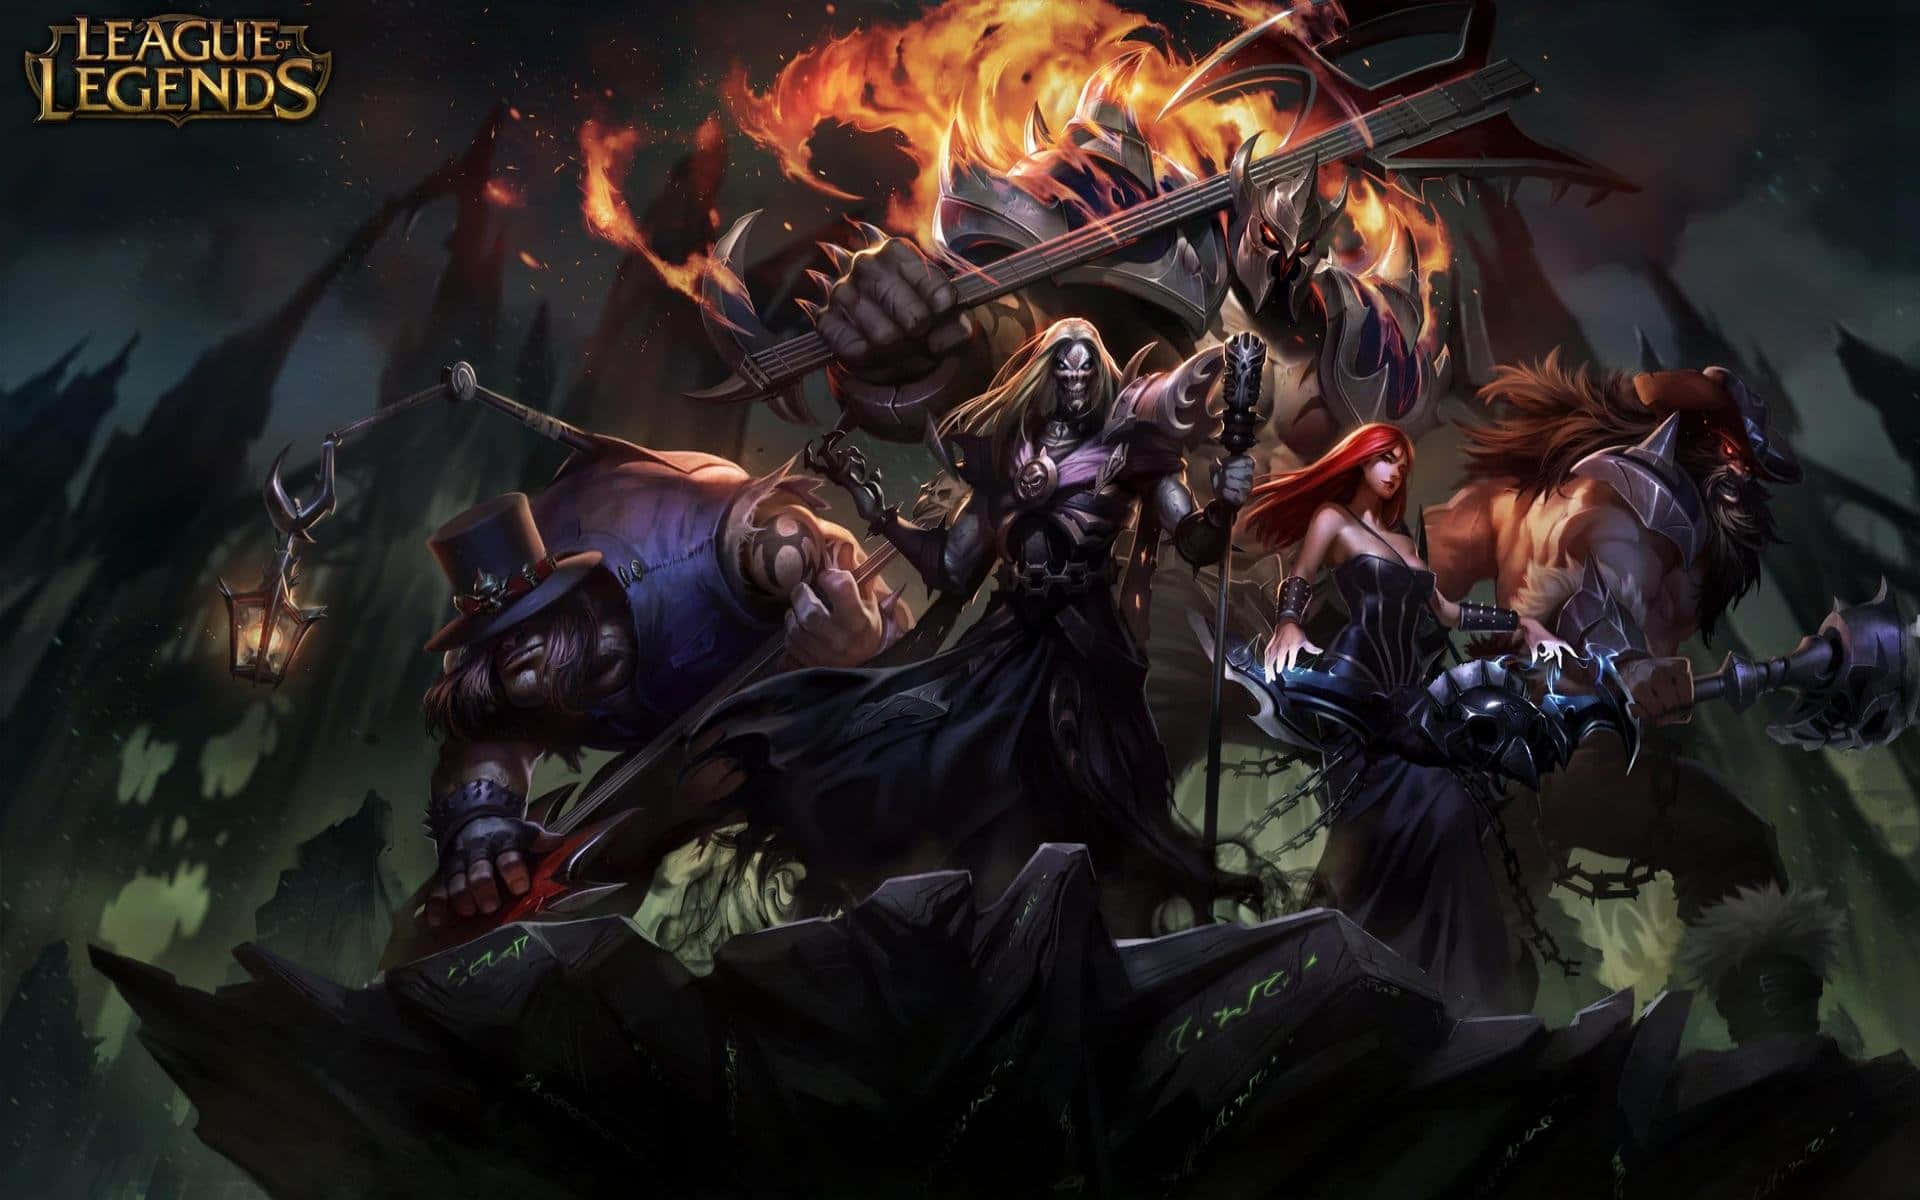 The Best league of Legends Wallpaper – Battle Champions to the Finish